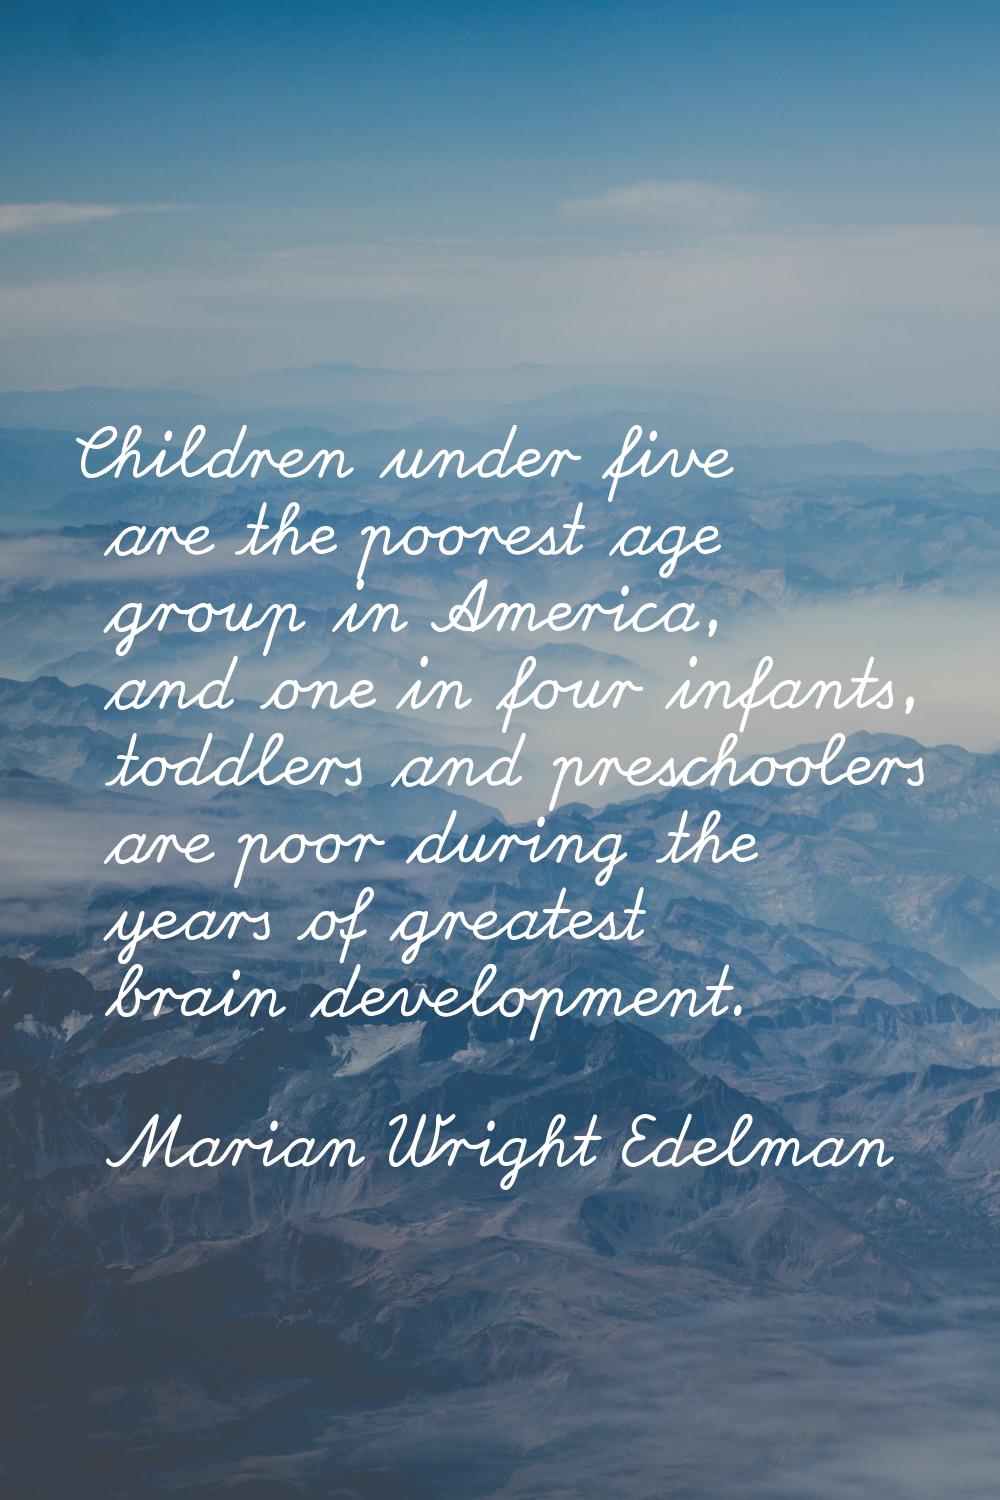 Children under five are the poorest age group in America, and one in four infants, toddlers and pre